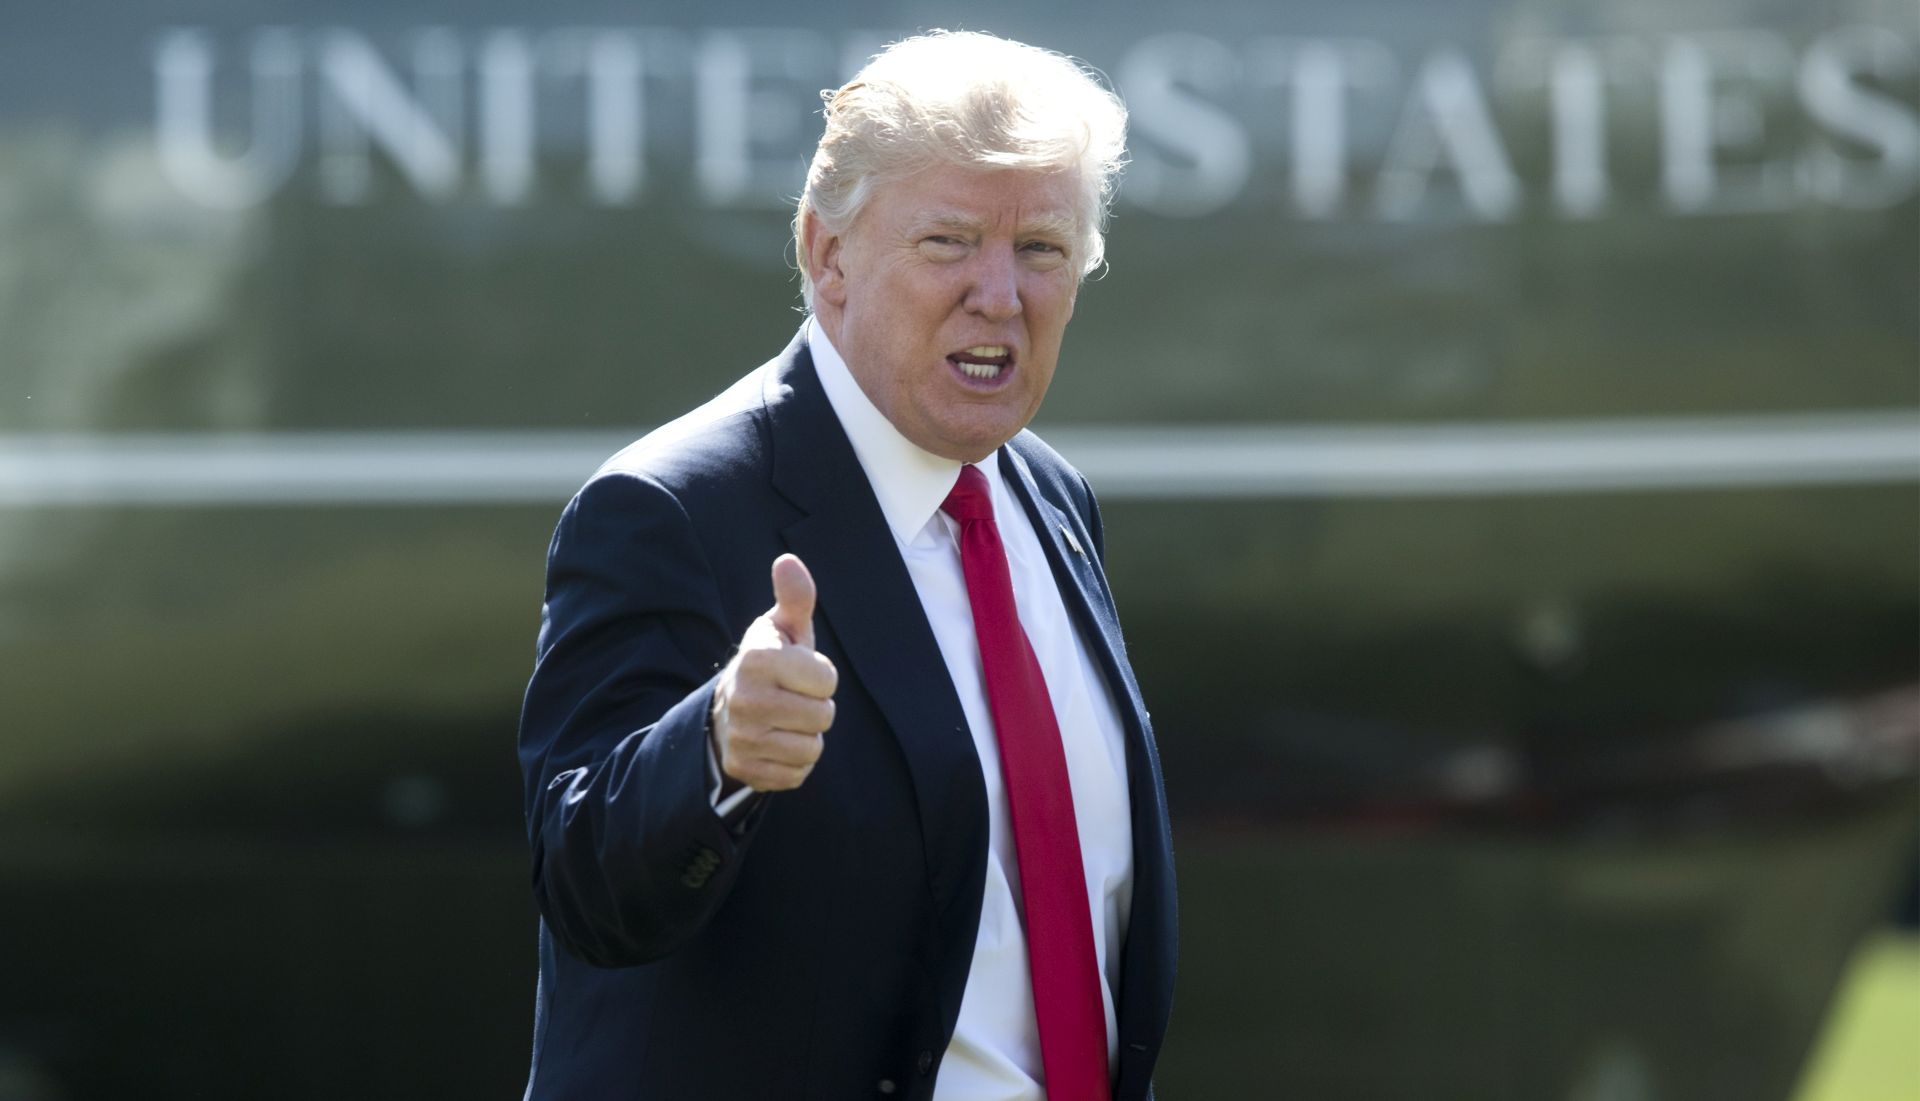 epa05812887 US President Donald J. Trump gestures giving a thumbs up after arriving by Marine One on the South Lawn of the White House, in Washington, DC, USA, 24 February 2017. Trump returns after delivering a speech at the Conservative Political Action Conference (CPAC).  EPA/MICHAEL REYNOLDS